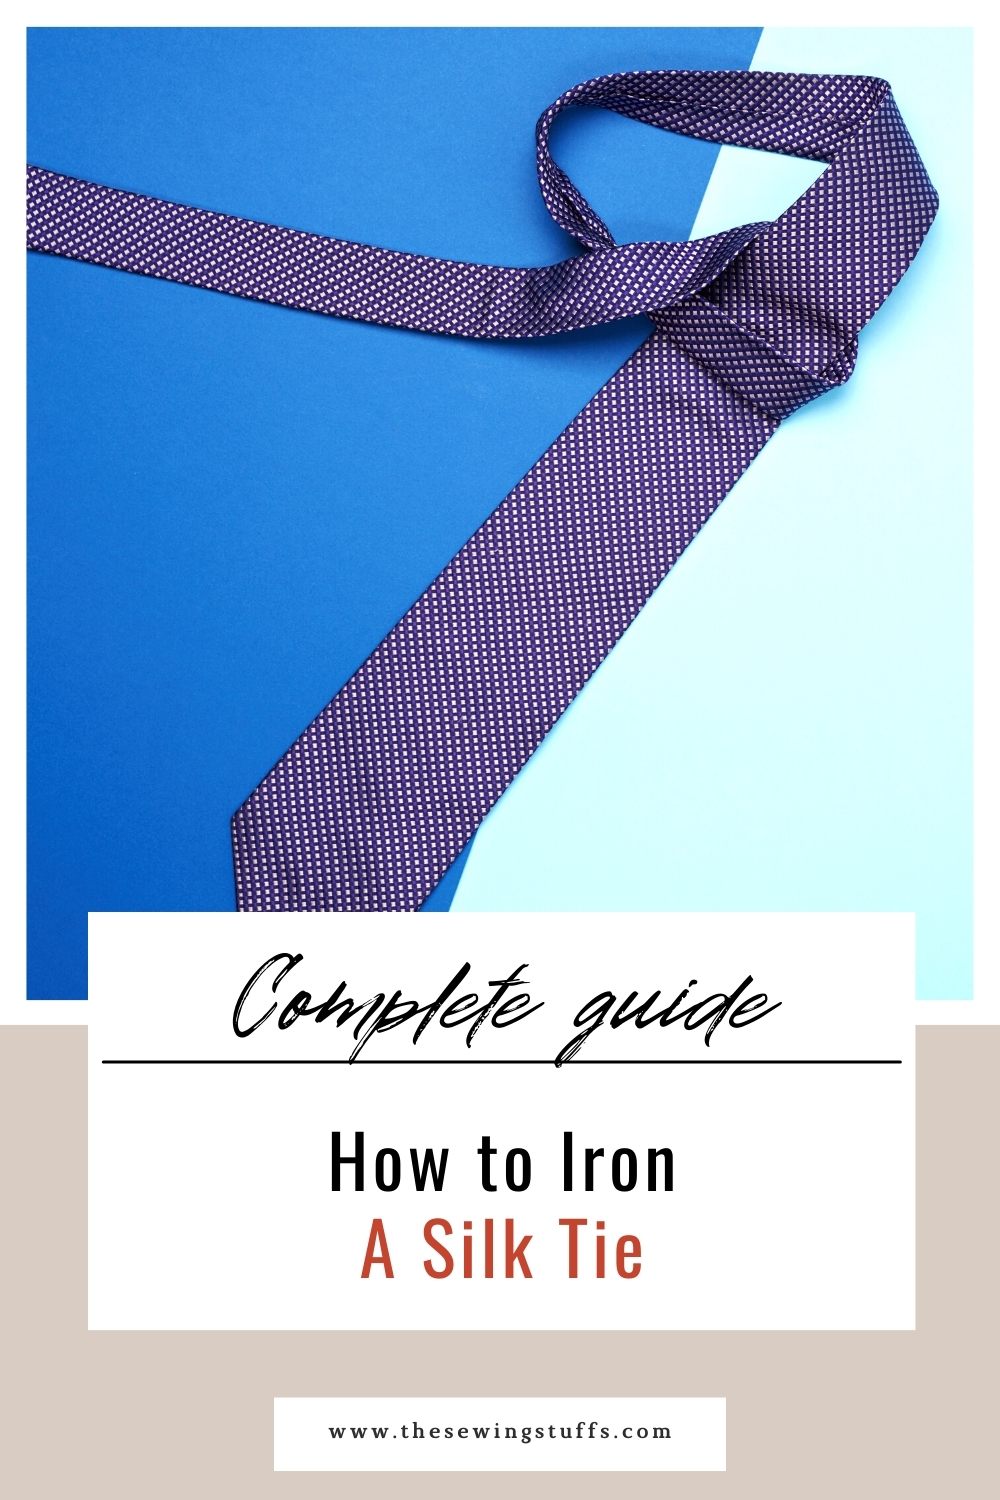 Can you iron a silk tie